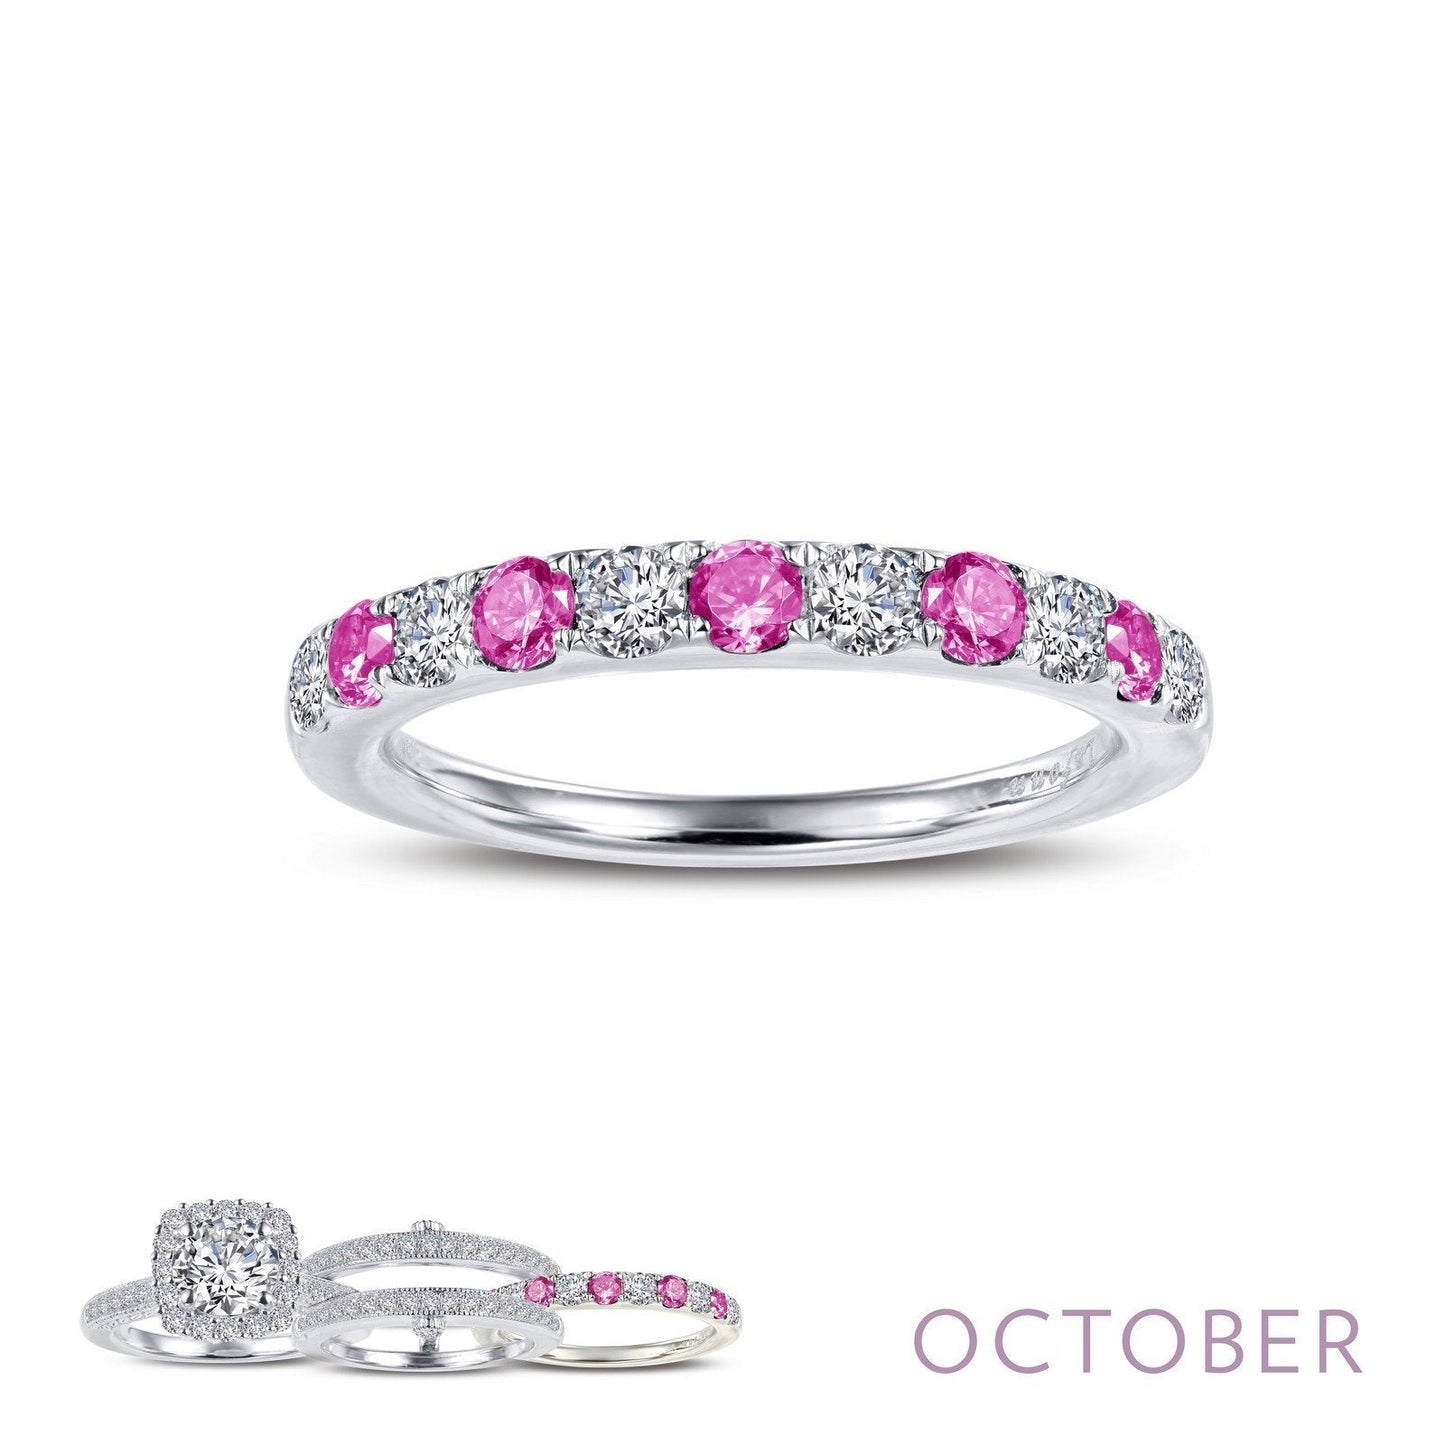 Load image into Gallery viewer, Lafonn October Birthstone Ring OCTOBER RINGS Size 8 Platinum 0.51cts CTS Approx.2.7mm(W)
